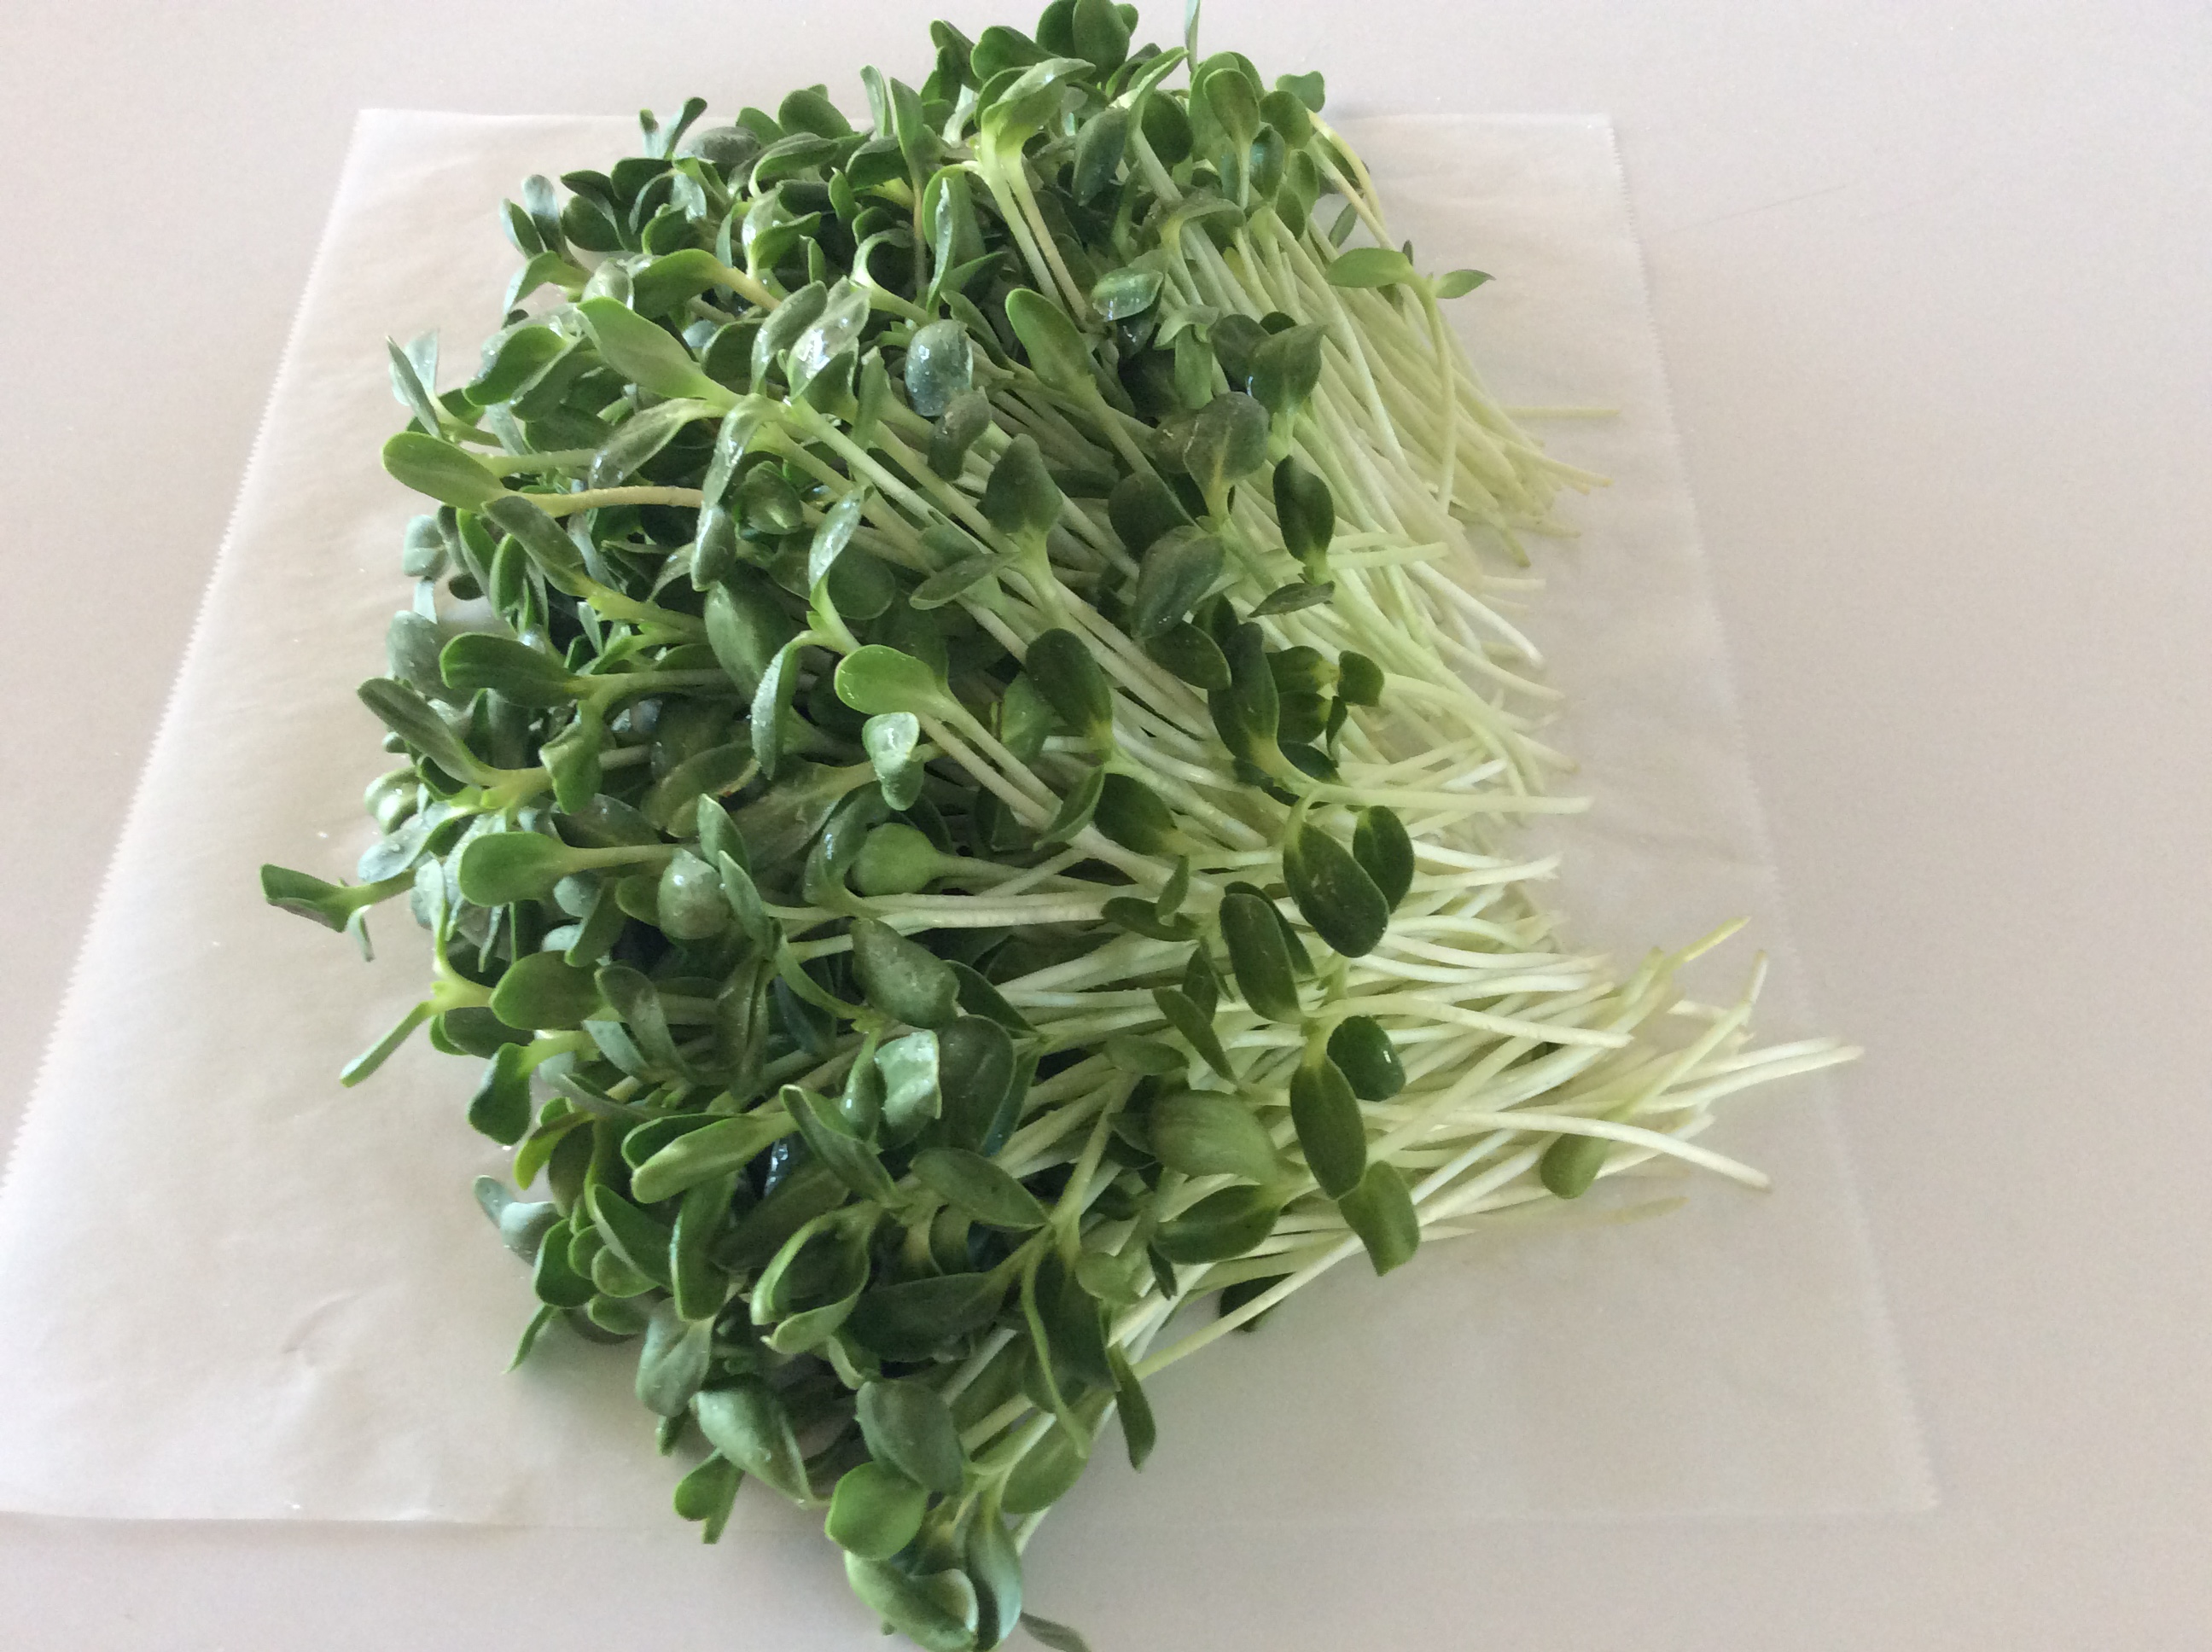 Organic Sunflower Sprouts | Got Sprouts?